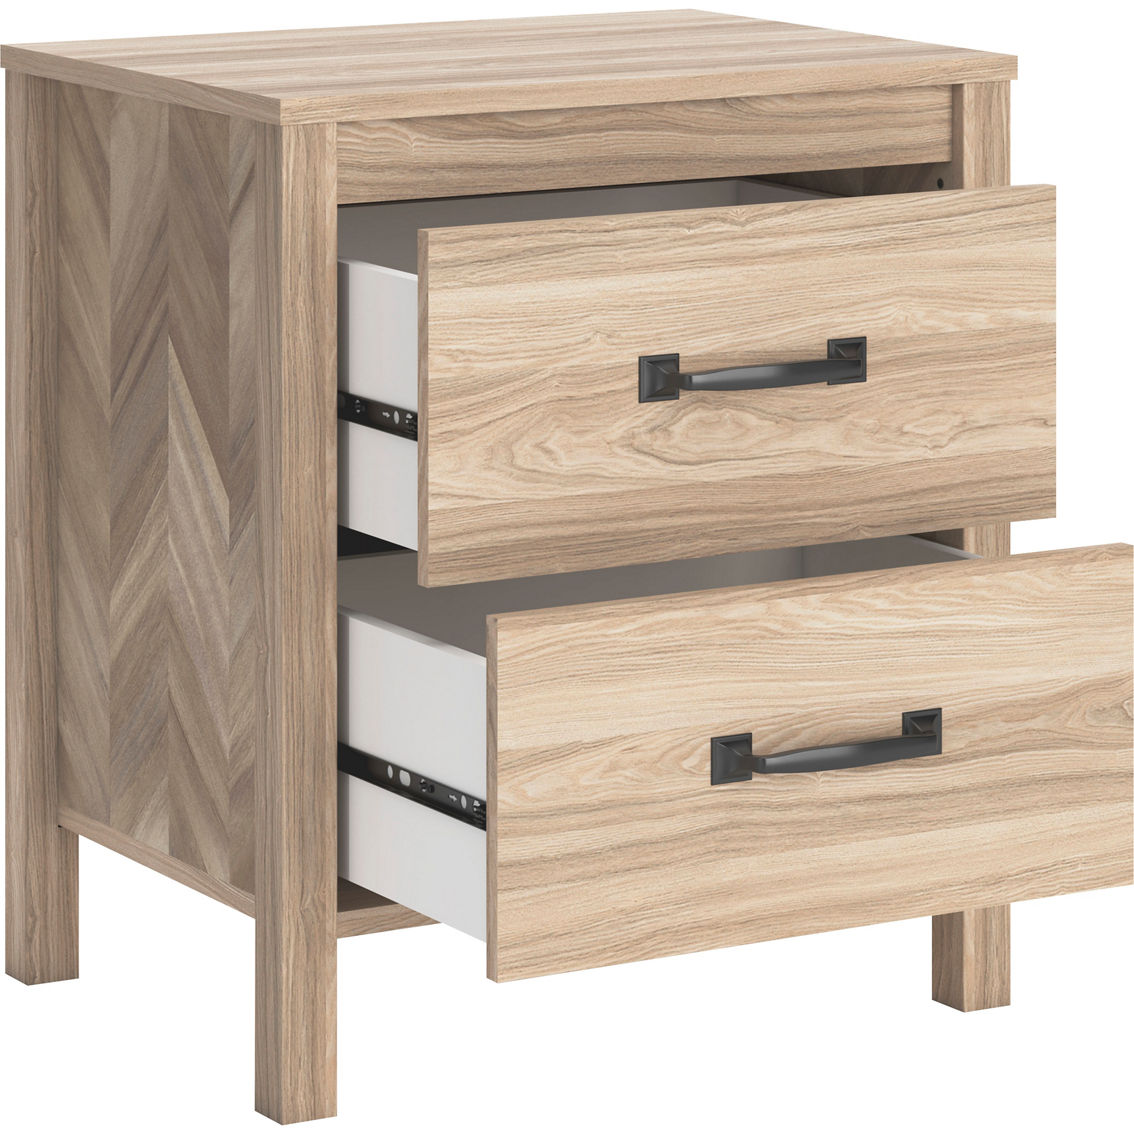 Signature Design by Ashley Battelle Ready-To-Assemble Nightstand - Image 4 of 7